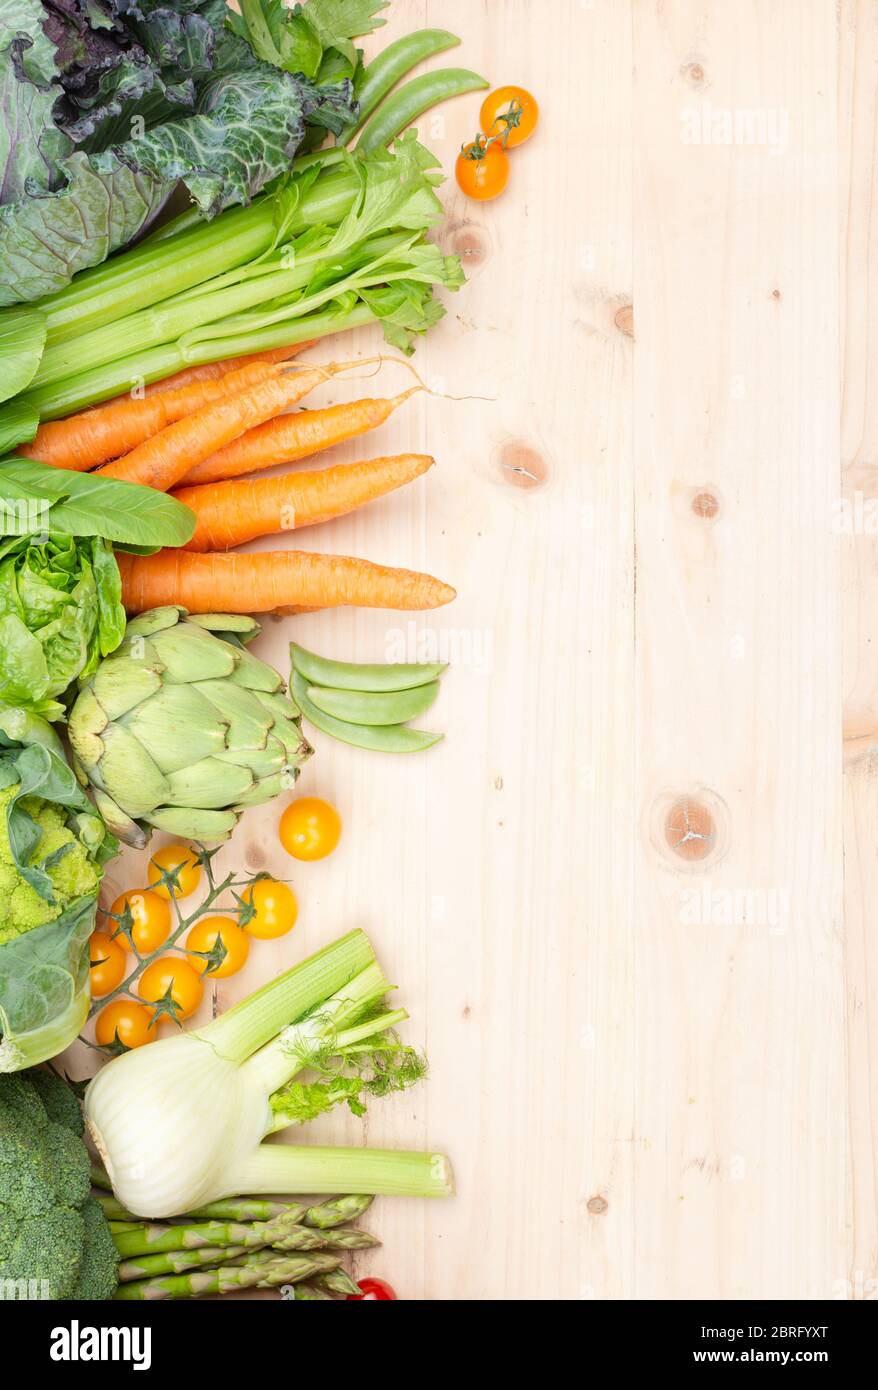 Top view of vegetables on wooden table, carrots celery tomatoes cabbage broccoli, copy space, selective focus Stock Photo